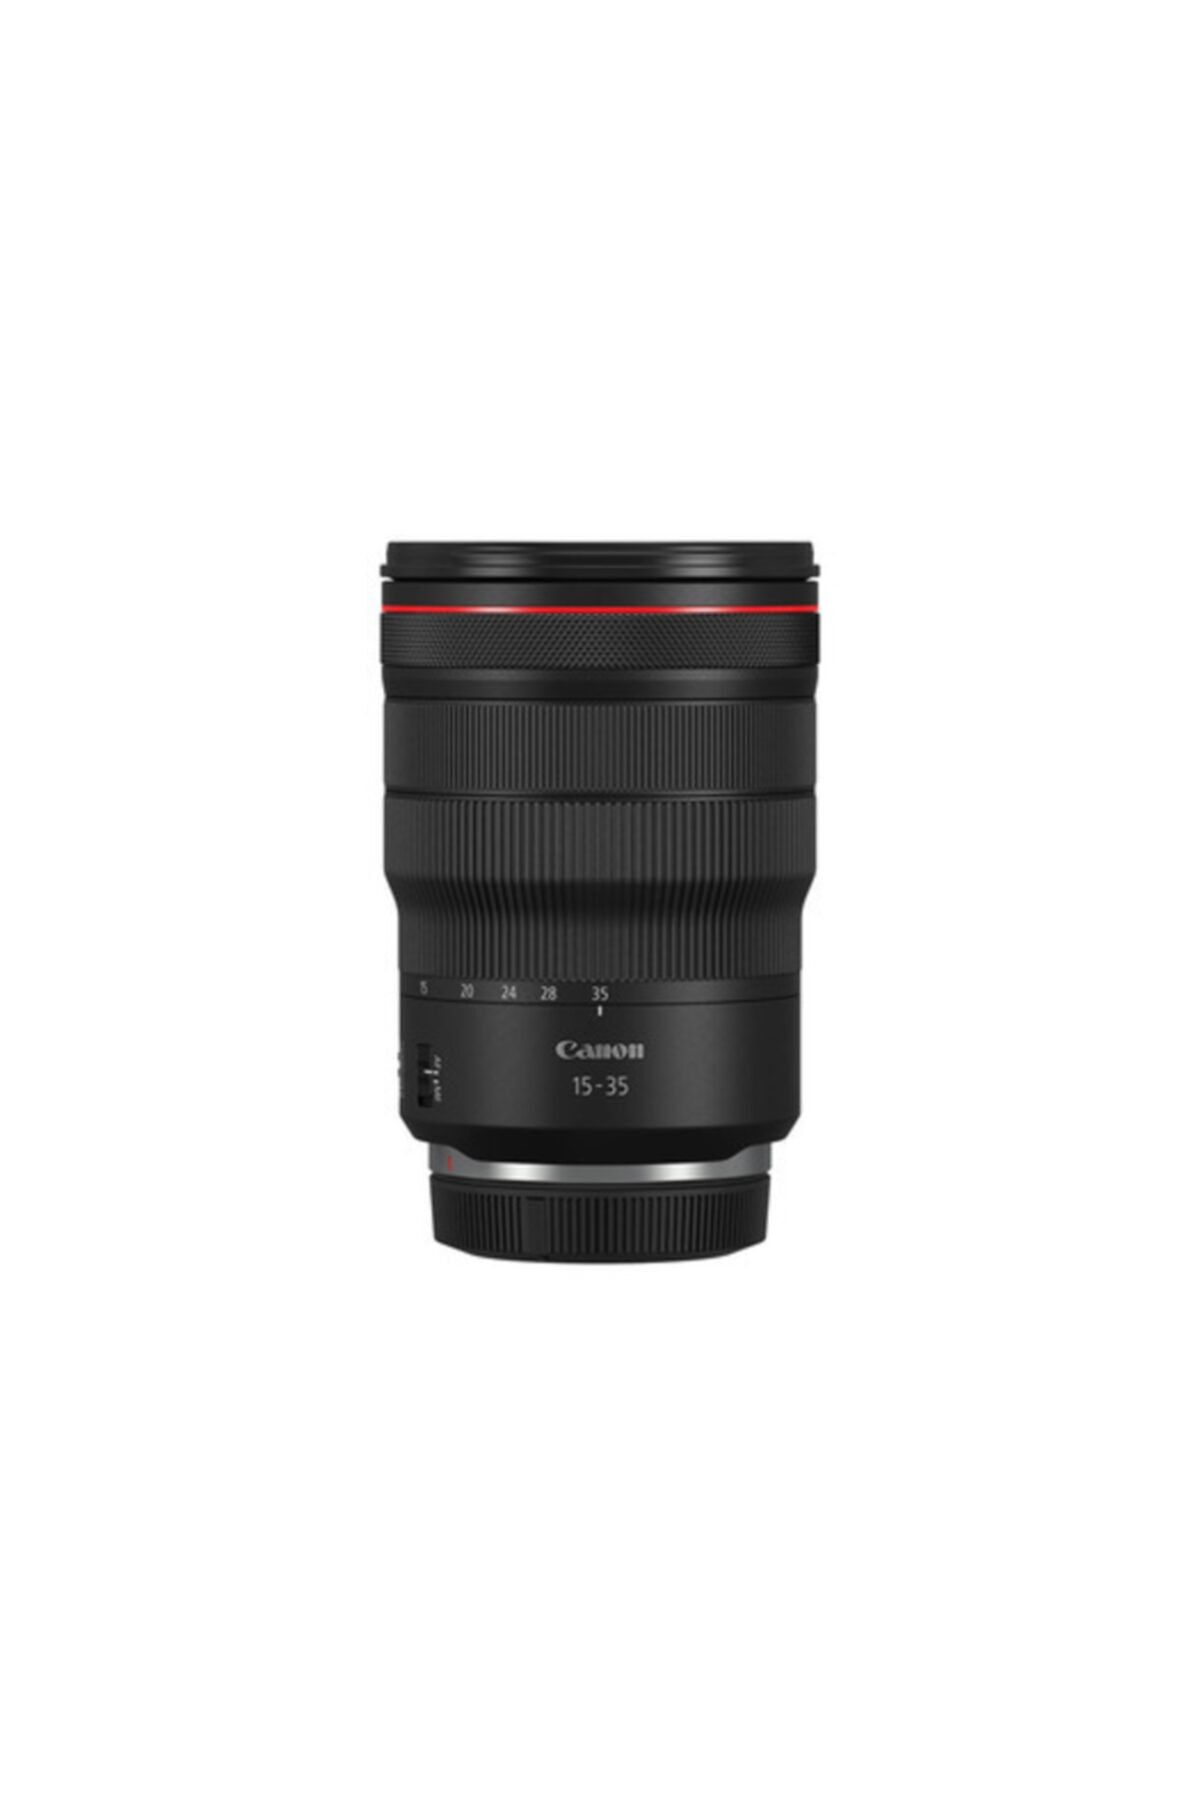 Canon Lens Rf15-35mm F2.8 L Is Usm